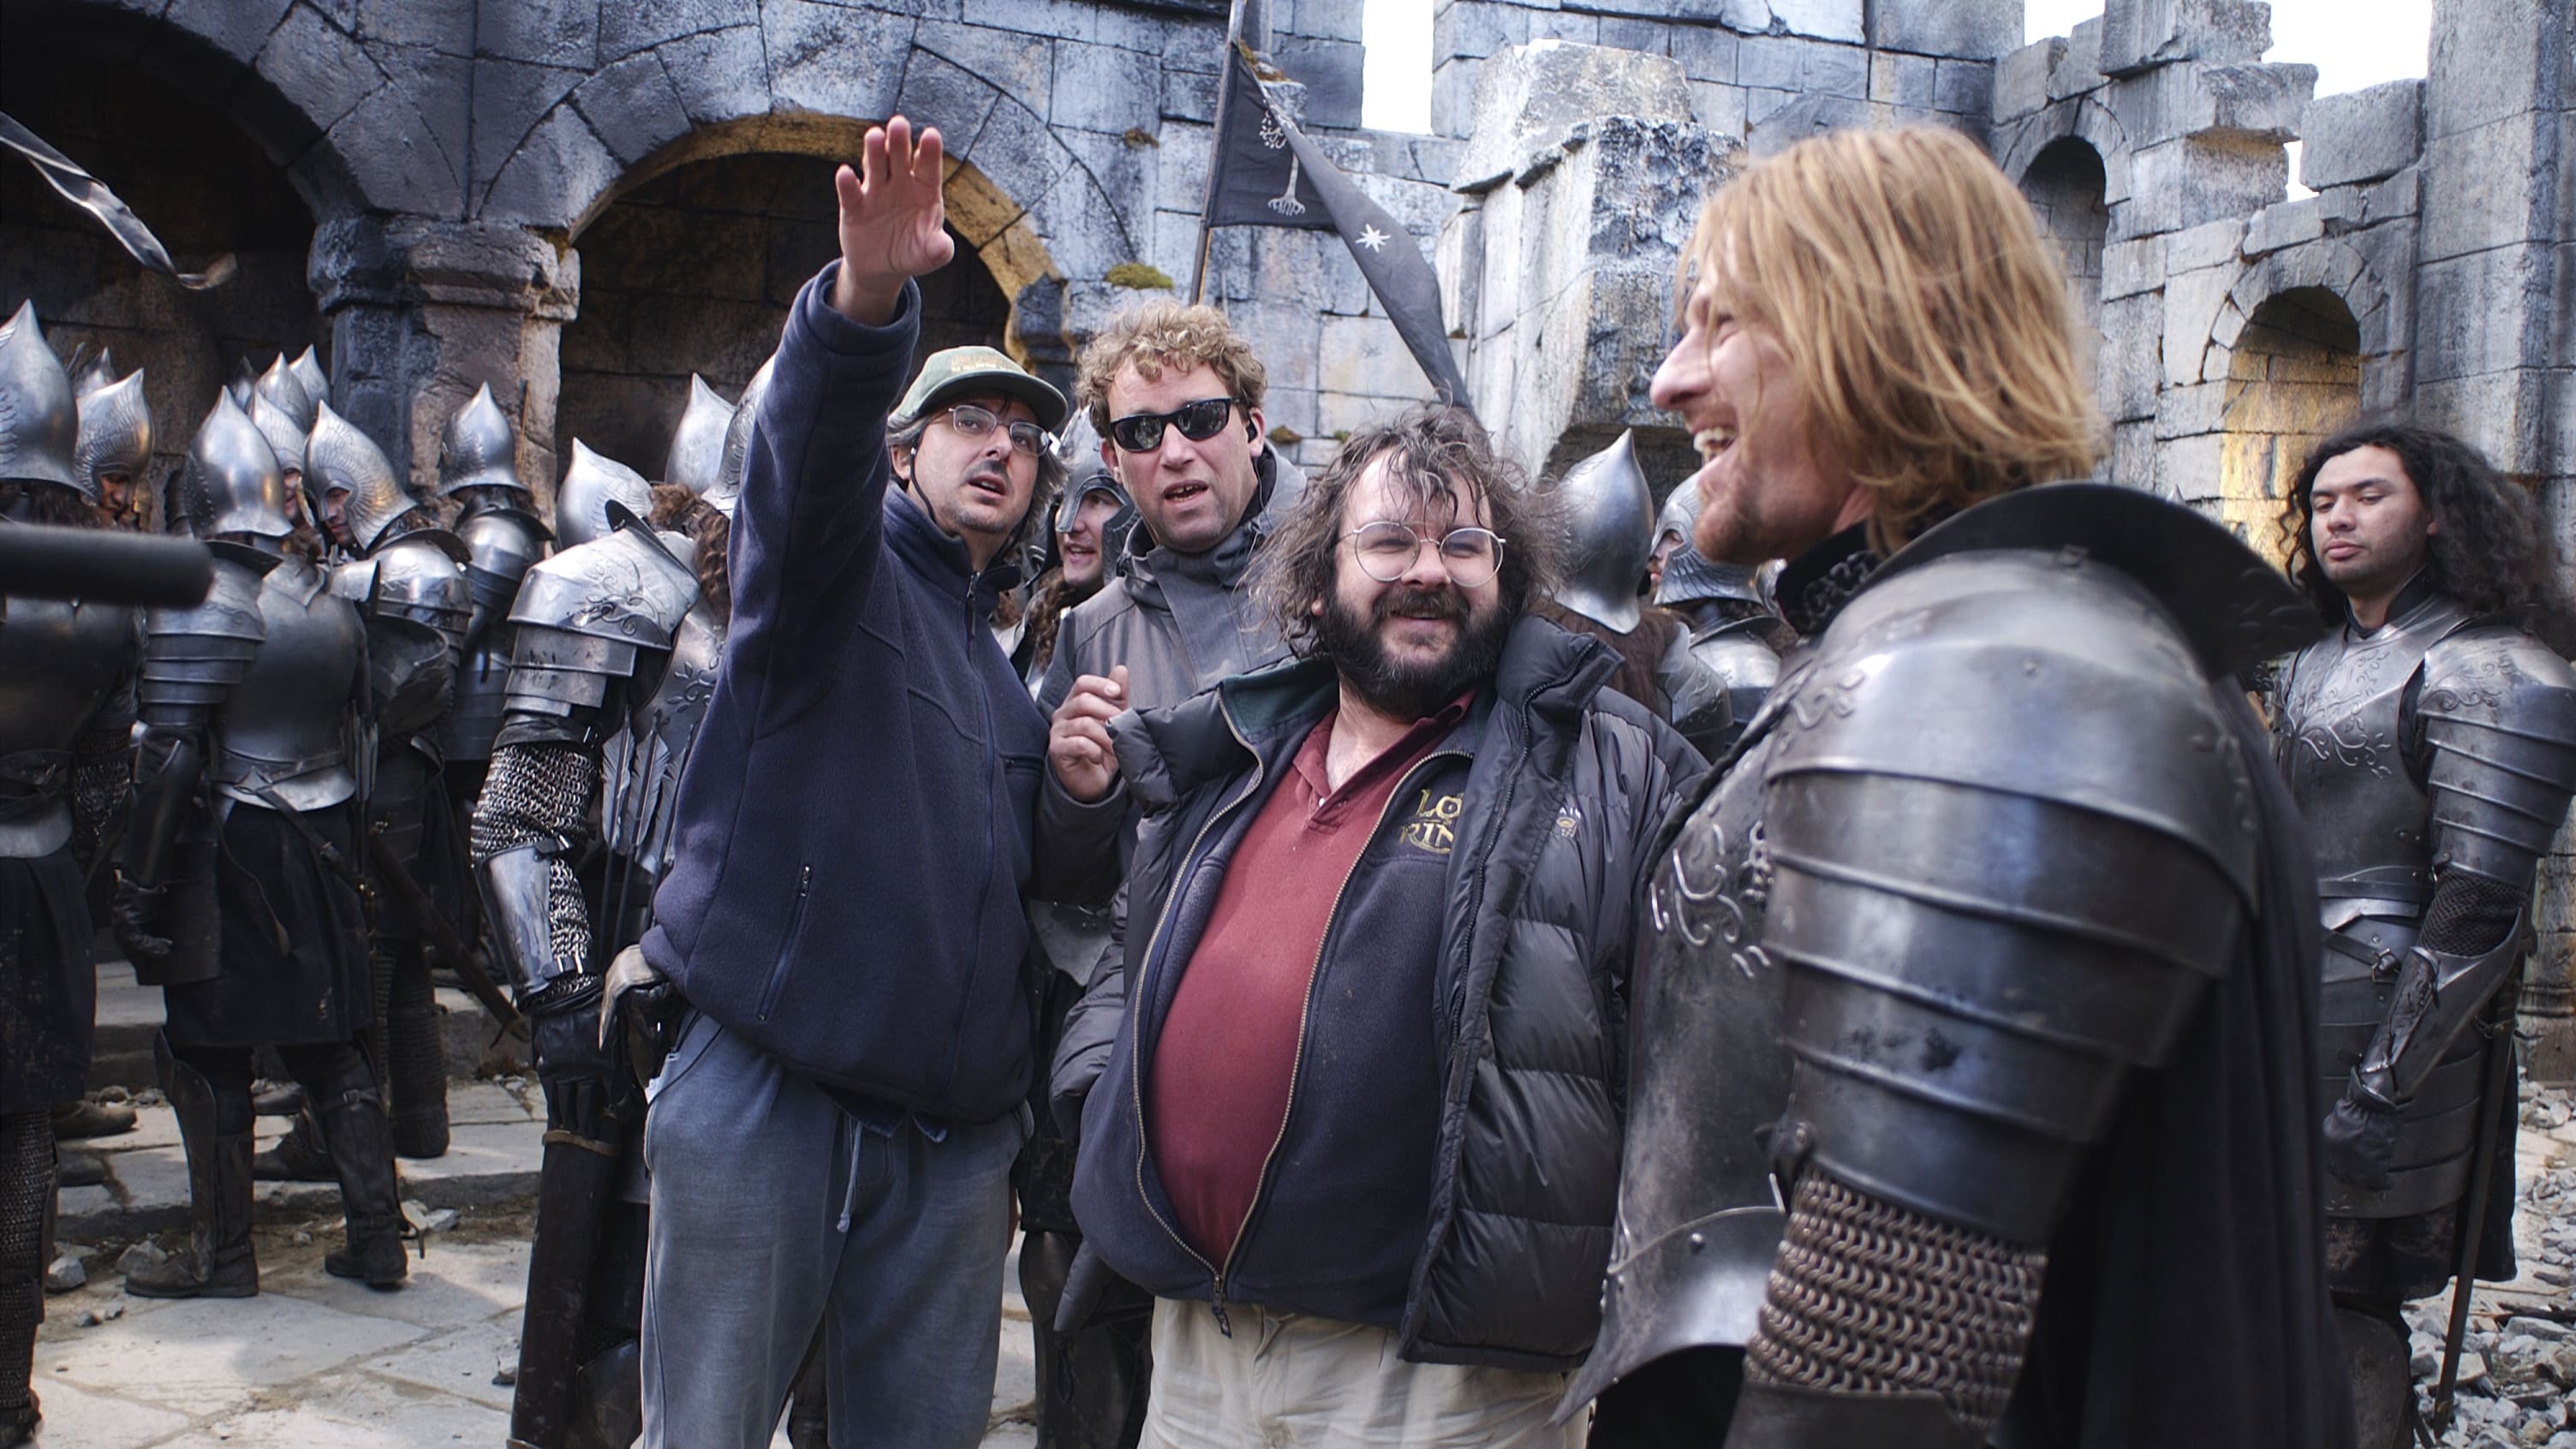 The Making of The Fellowship of the Ring (2006)